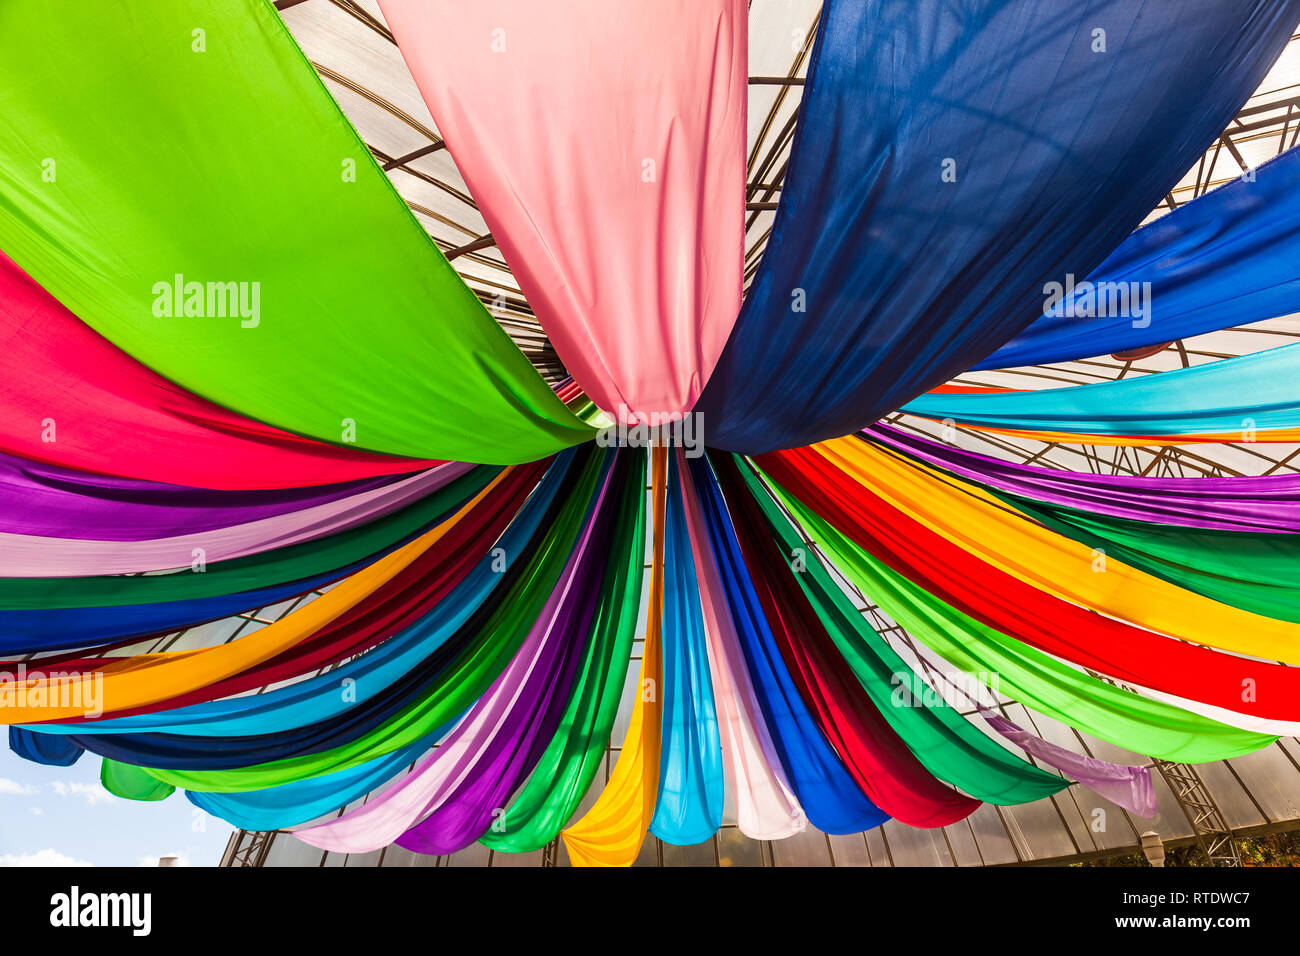 Fabrics Of Various Colors Hanging From A Ceiling Stock Photo